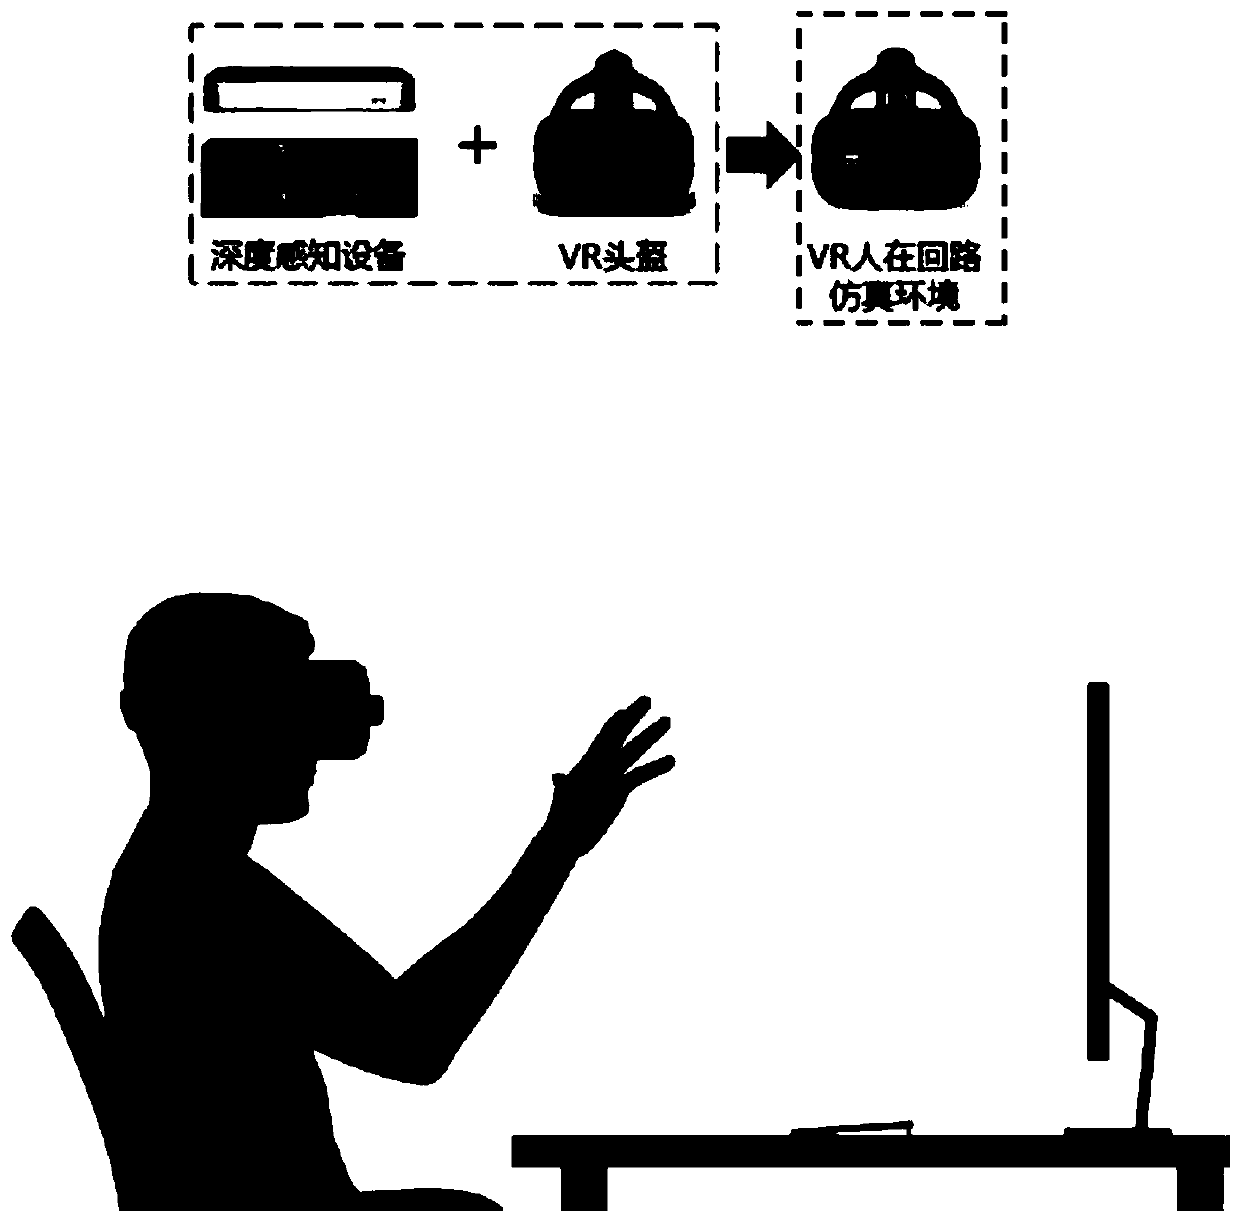 Virtual maintainability simulation method based on depth perception gesture recognition